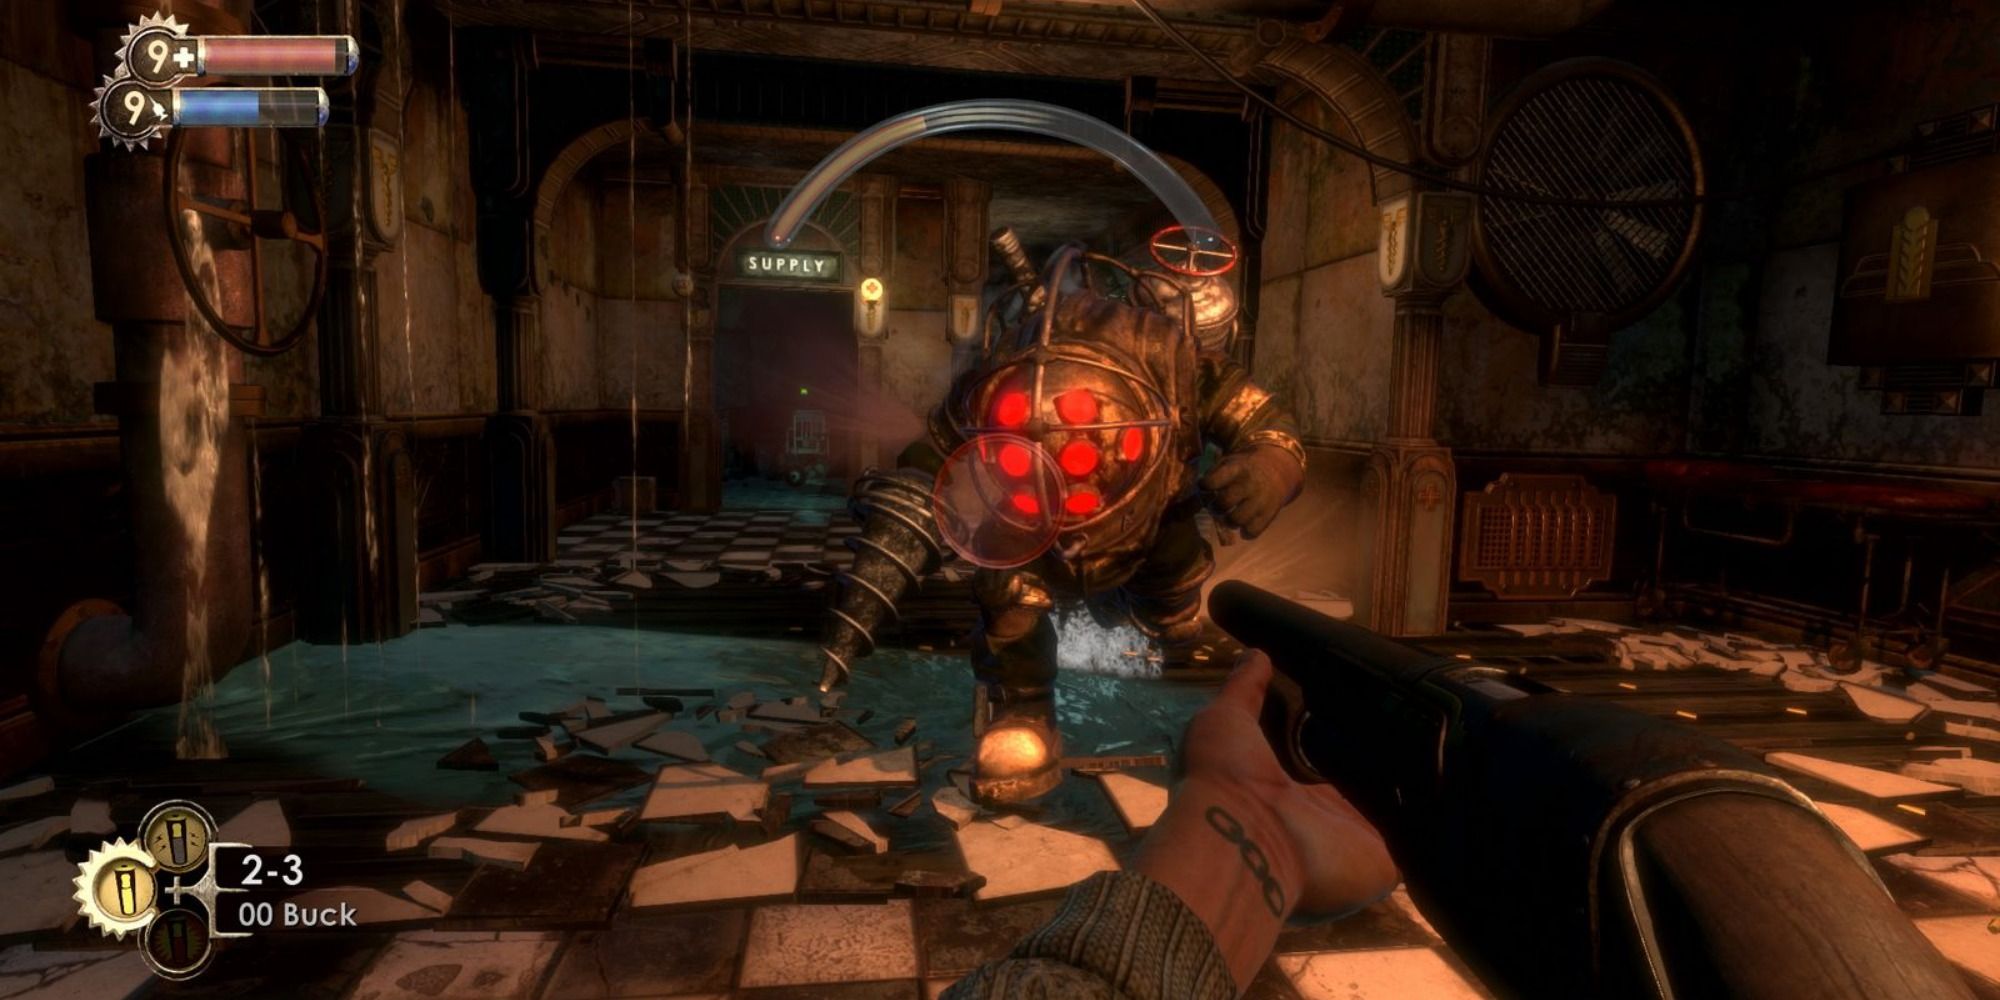 A player aims a shotgun at a Big Daddy charging them in an abandoned hallway